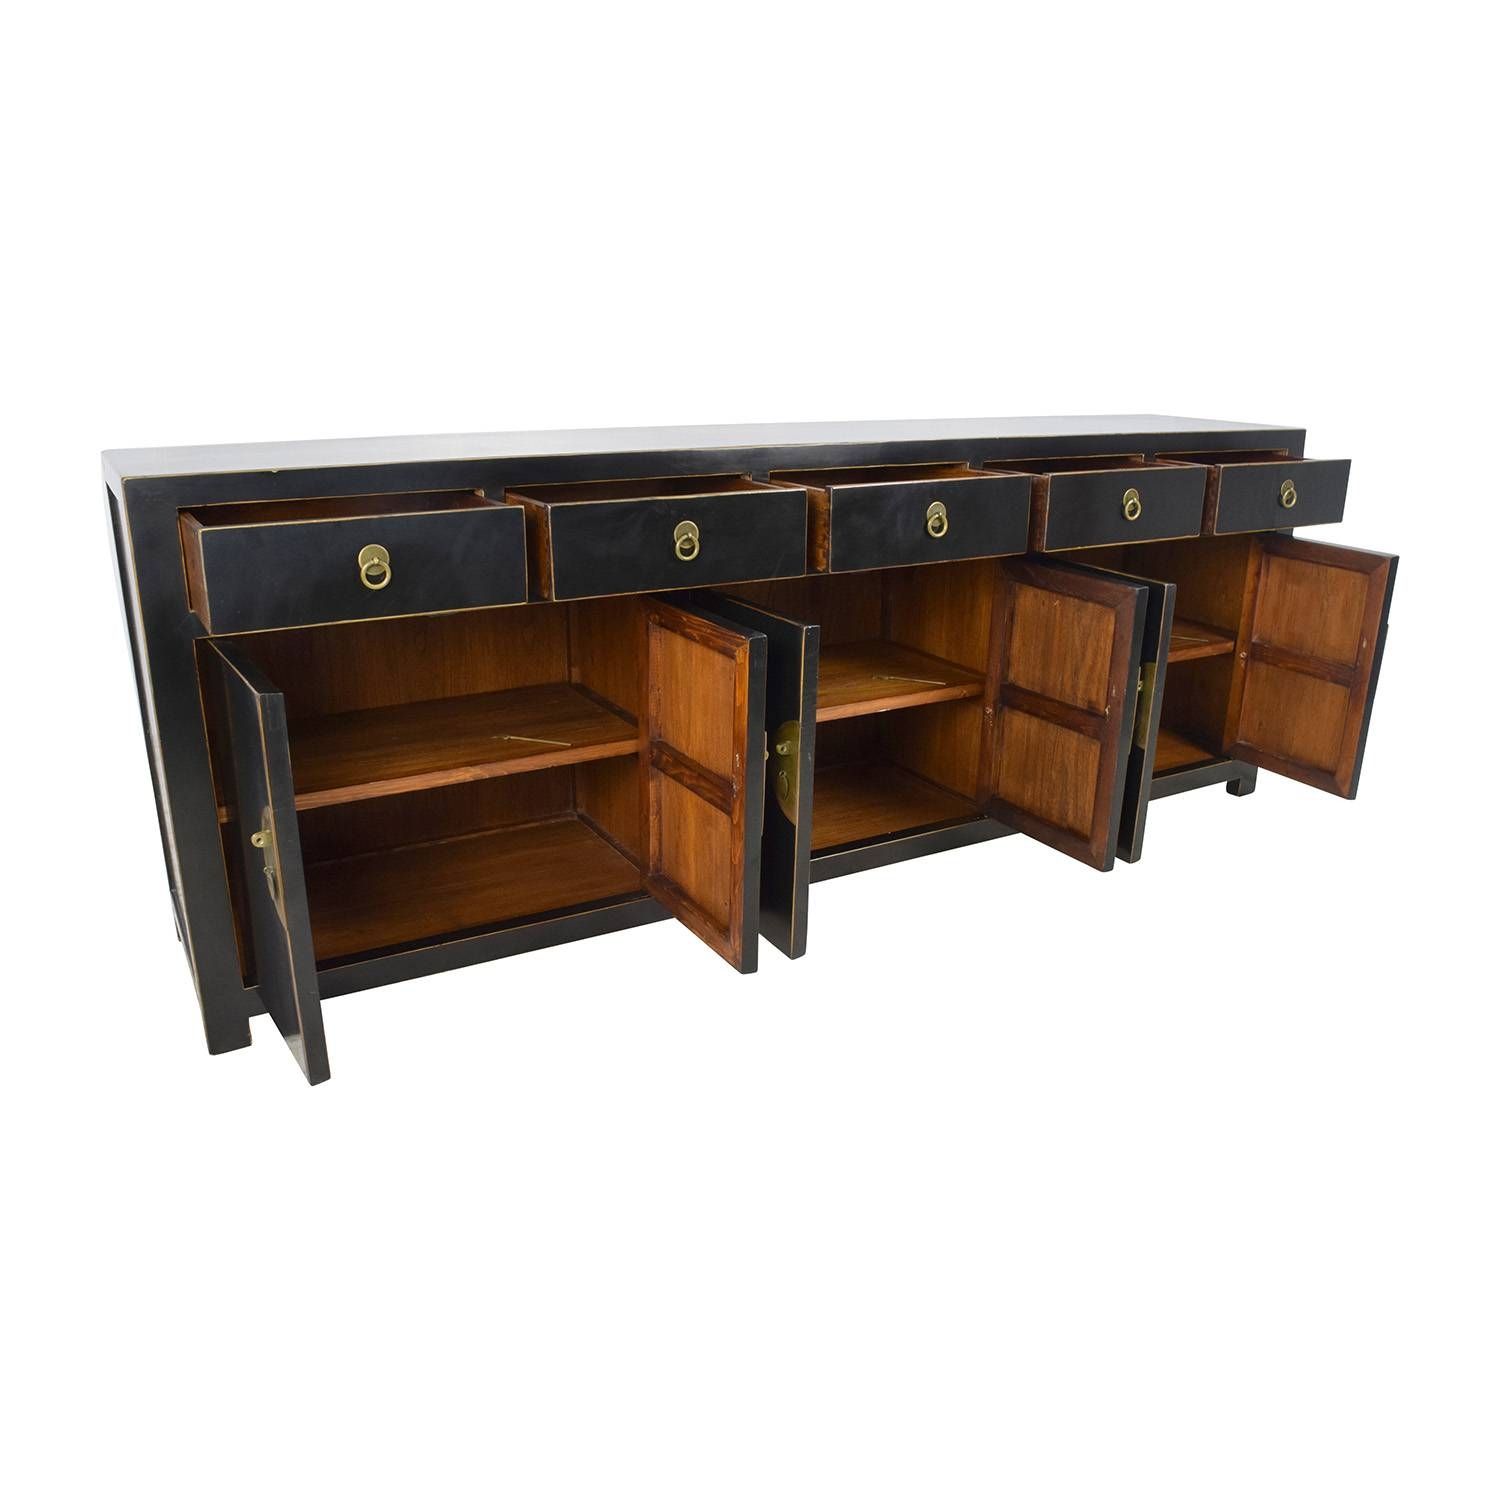 85% Off – Custom Made Black Drawer And Cabinet Sideboard / Storage Within Ready Made Sideboards (View 10 of 20)